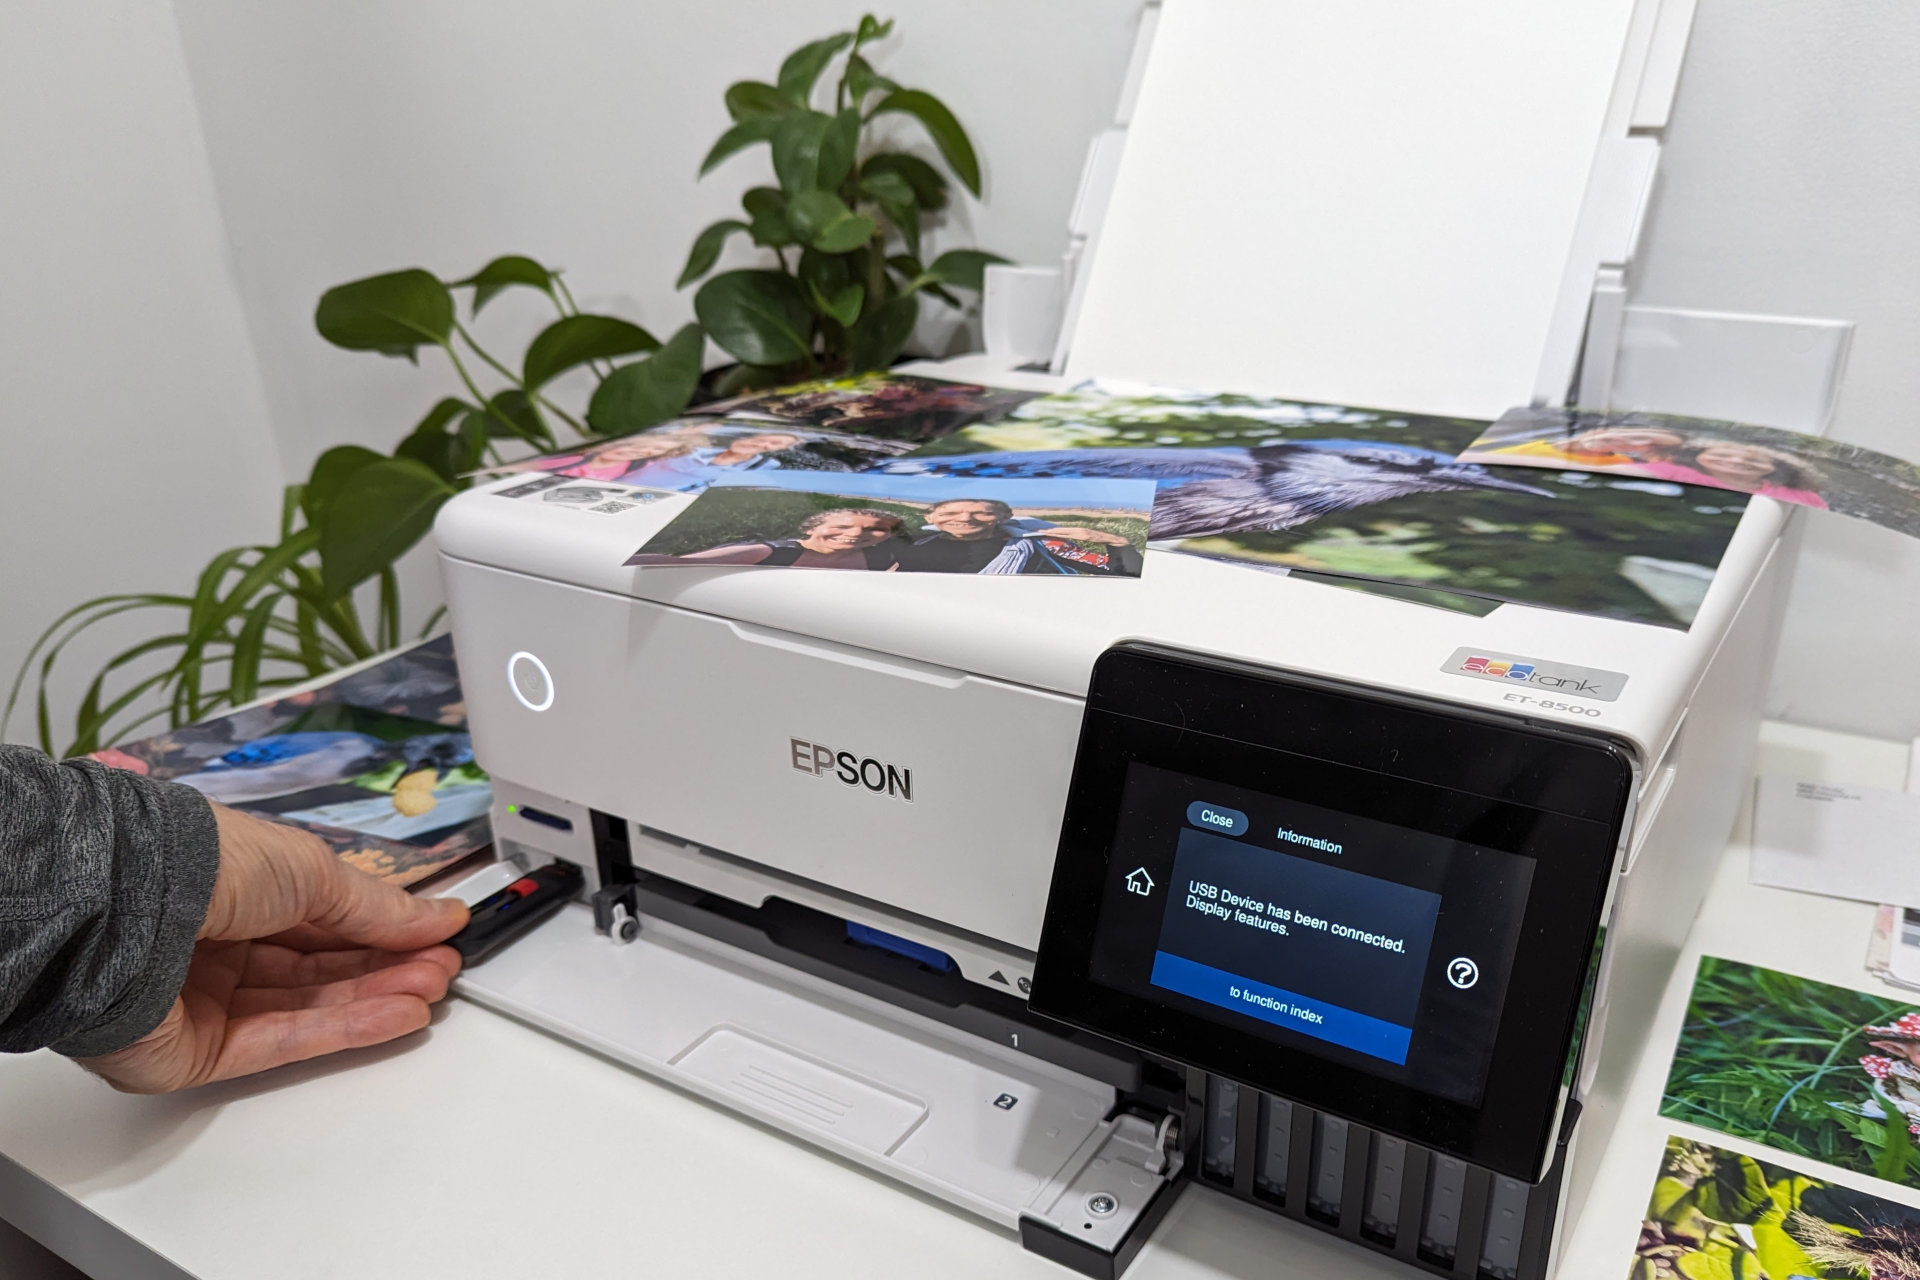 Walk-up printing is easy since the EcoTank ET-8500 supports SD cards and USB drives.